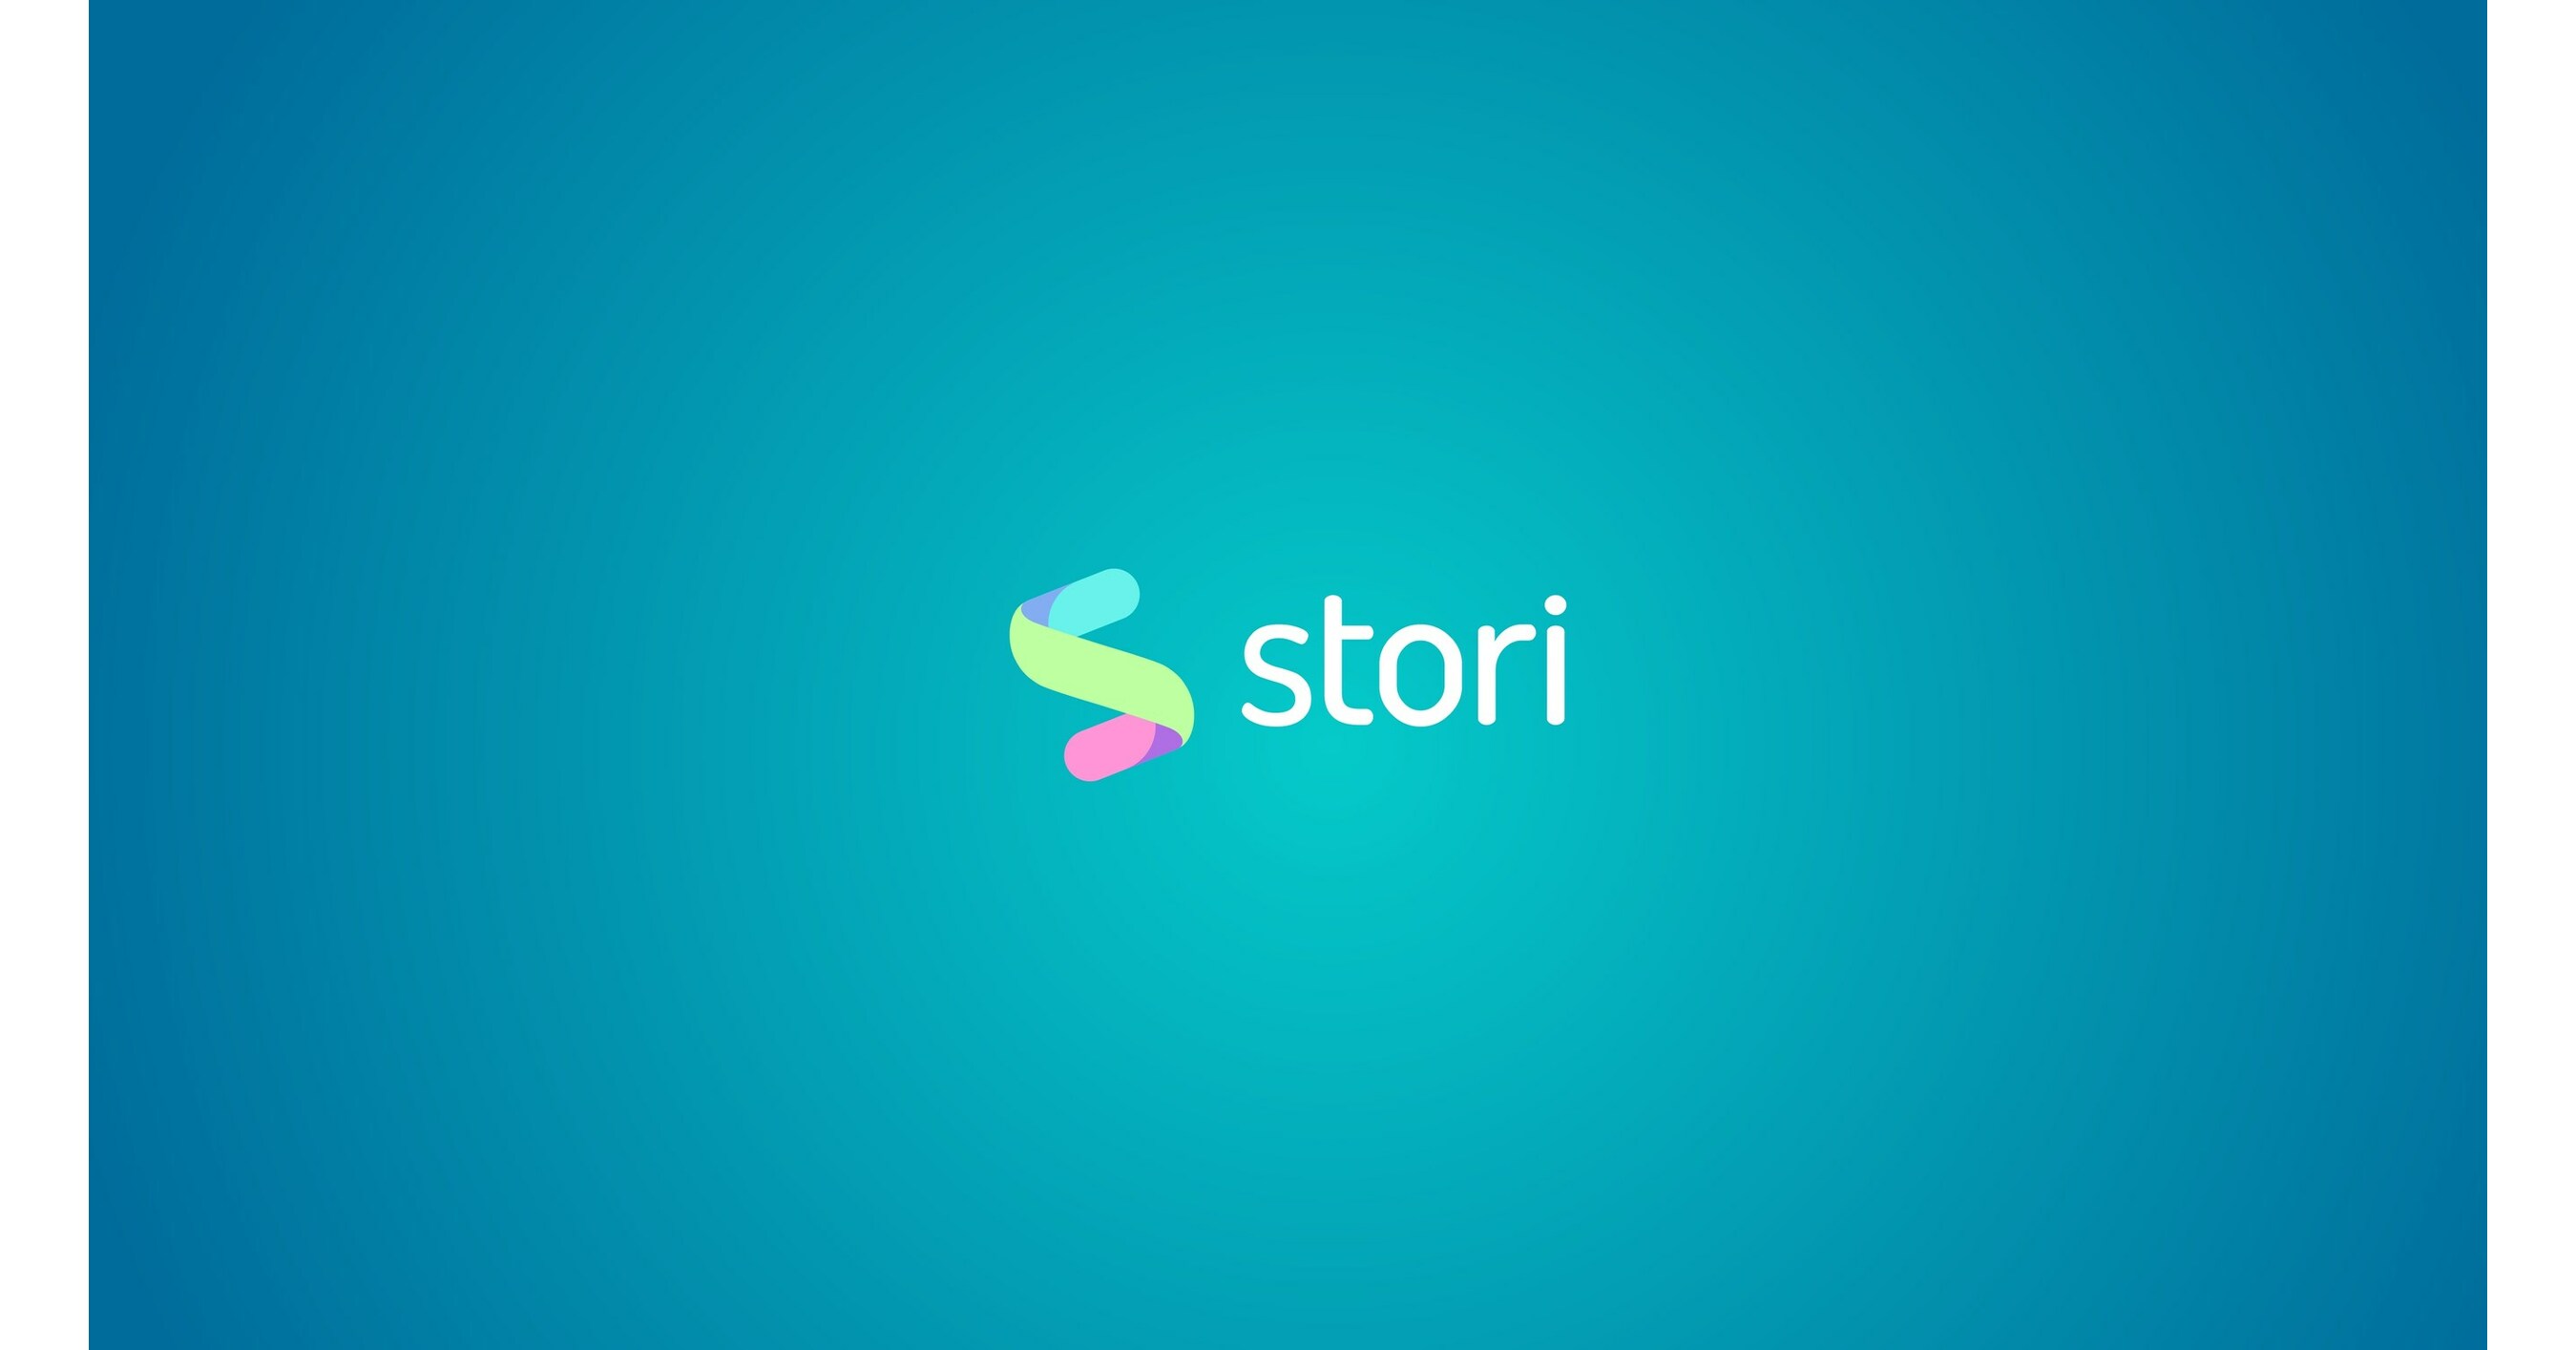 Stori, the Mexican Unicorn, obtains approval to acquire the Sofipo MasCaja,  a licensed deposit entity, to expand its product offering